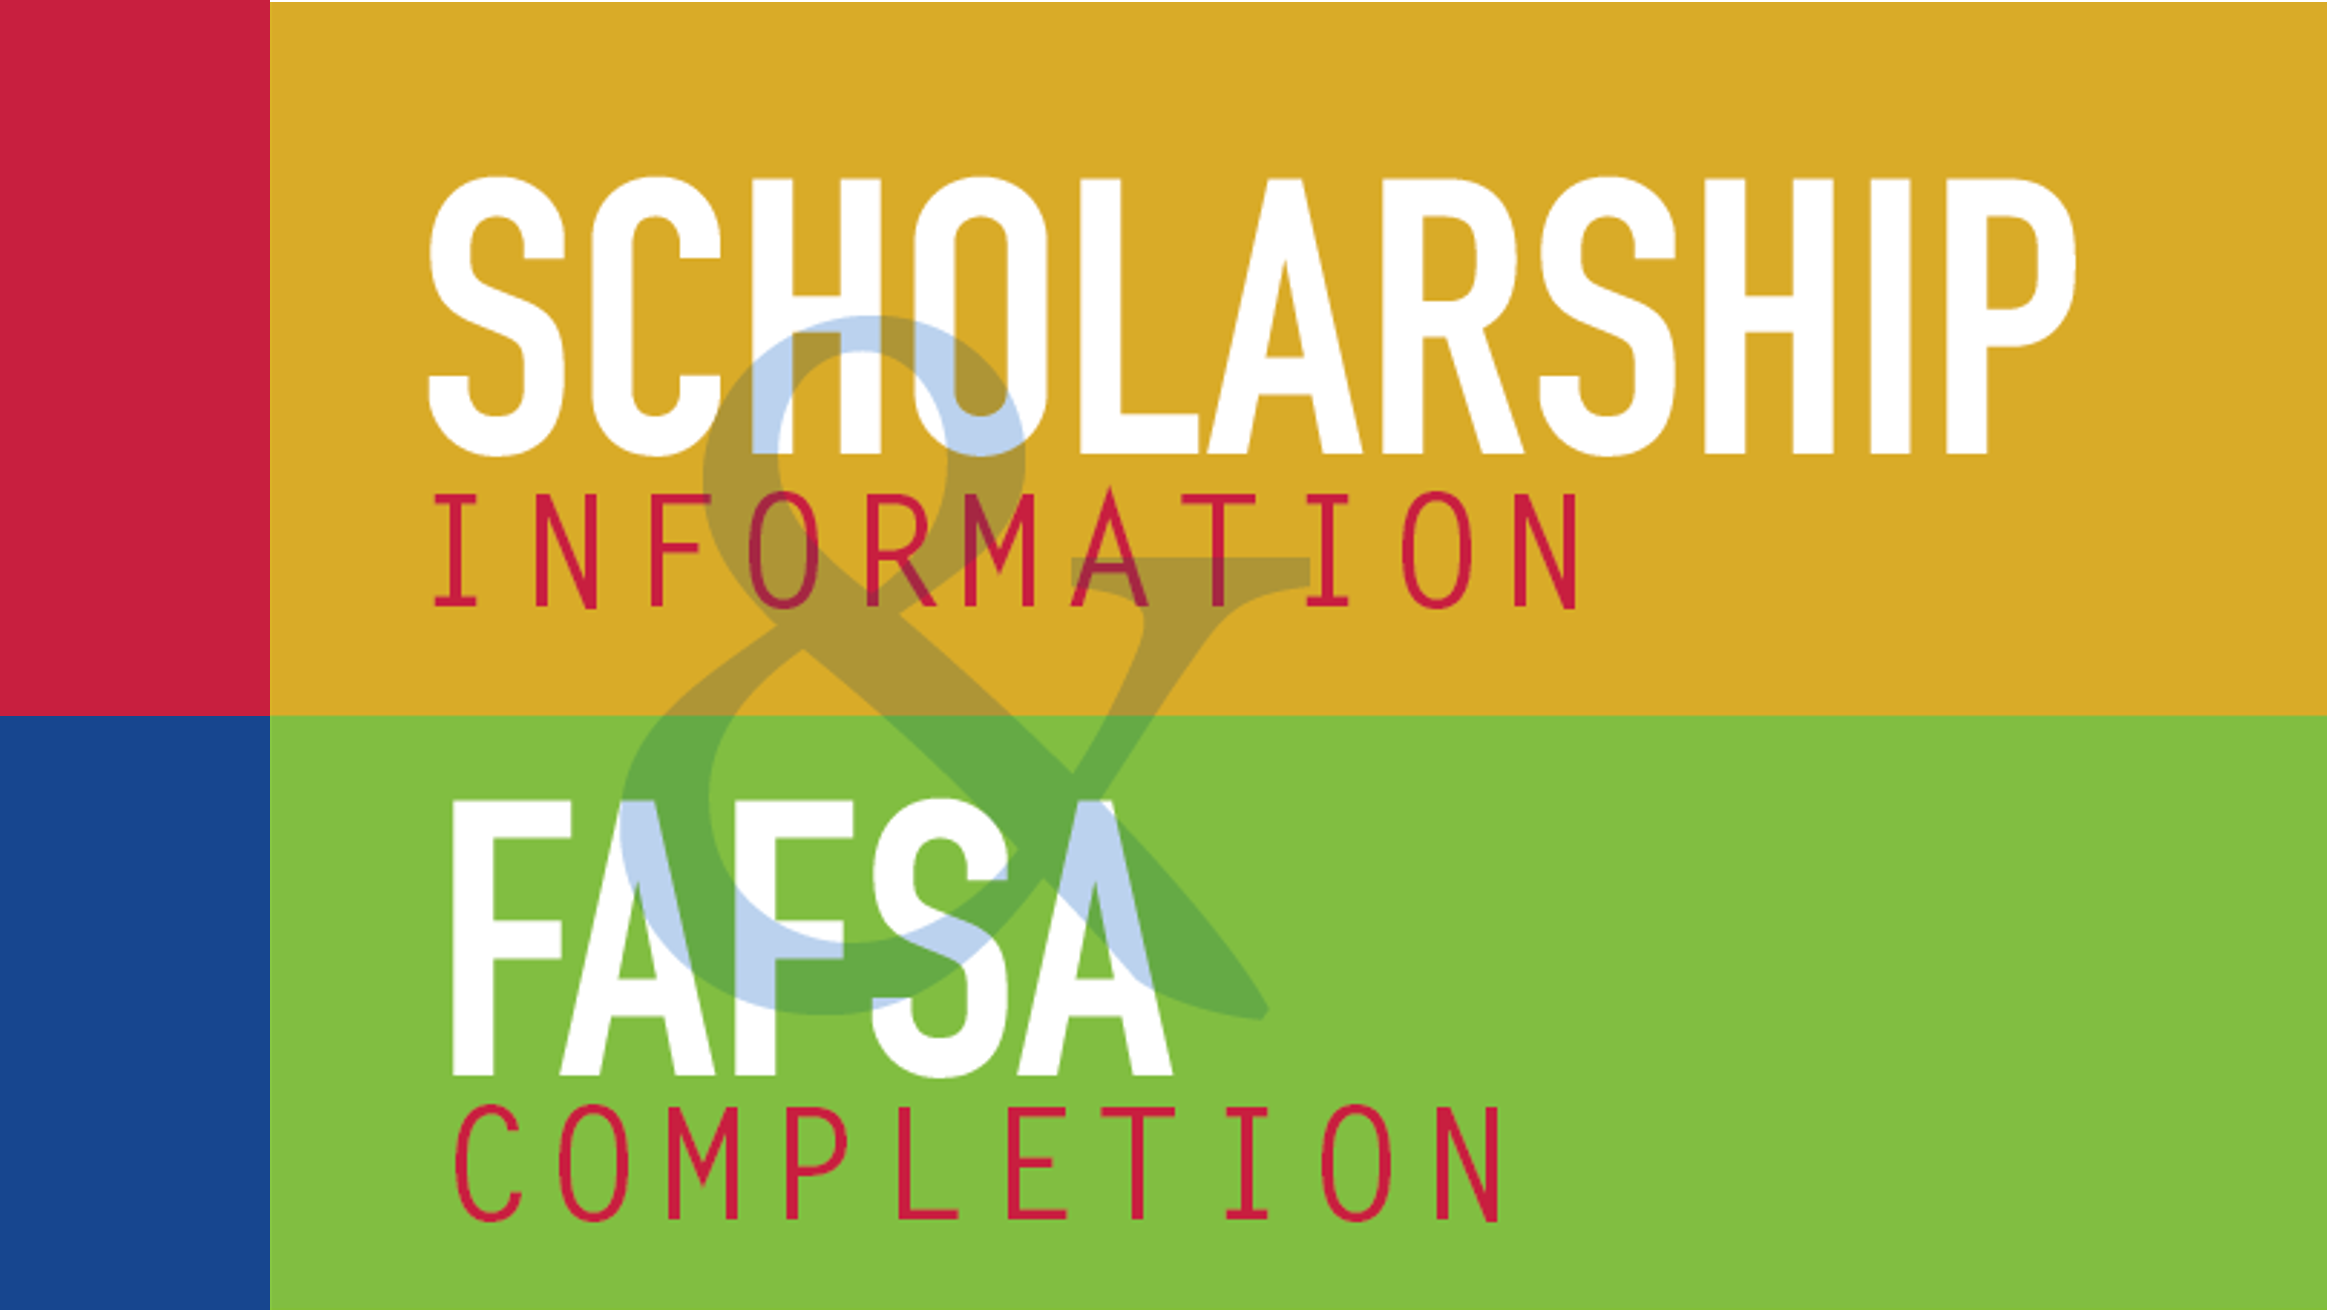 Scholarship Information & FAFSA Completion